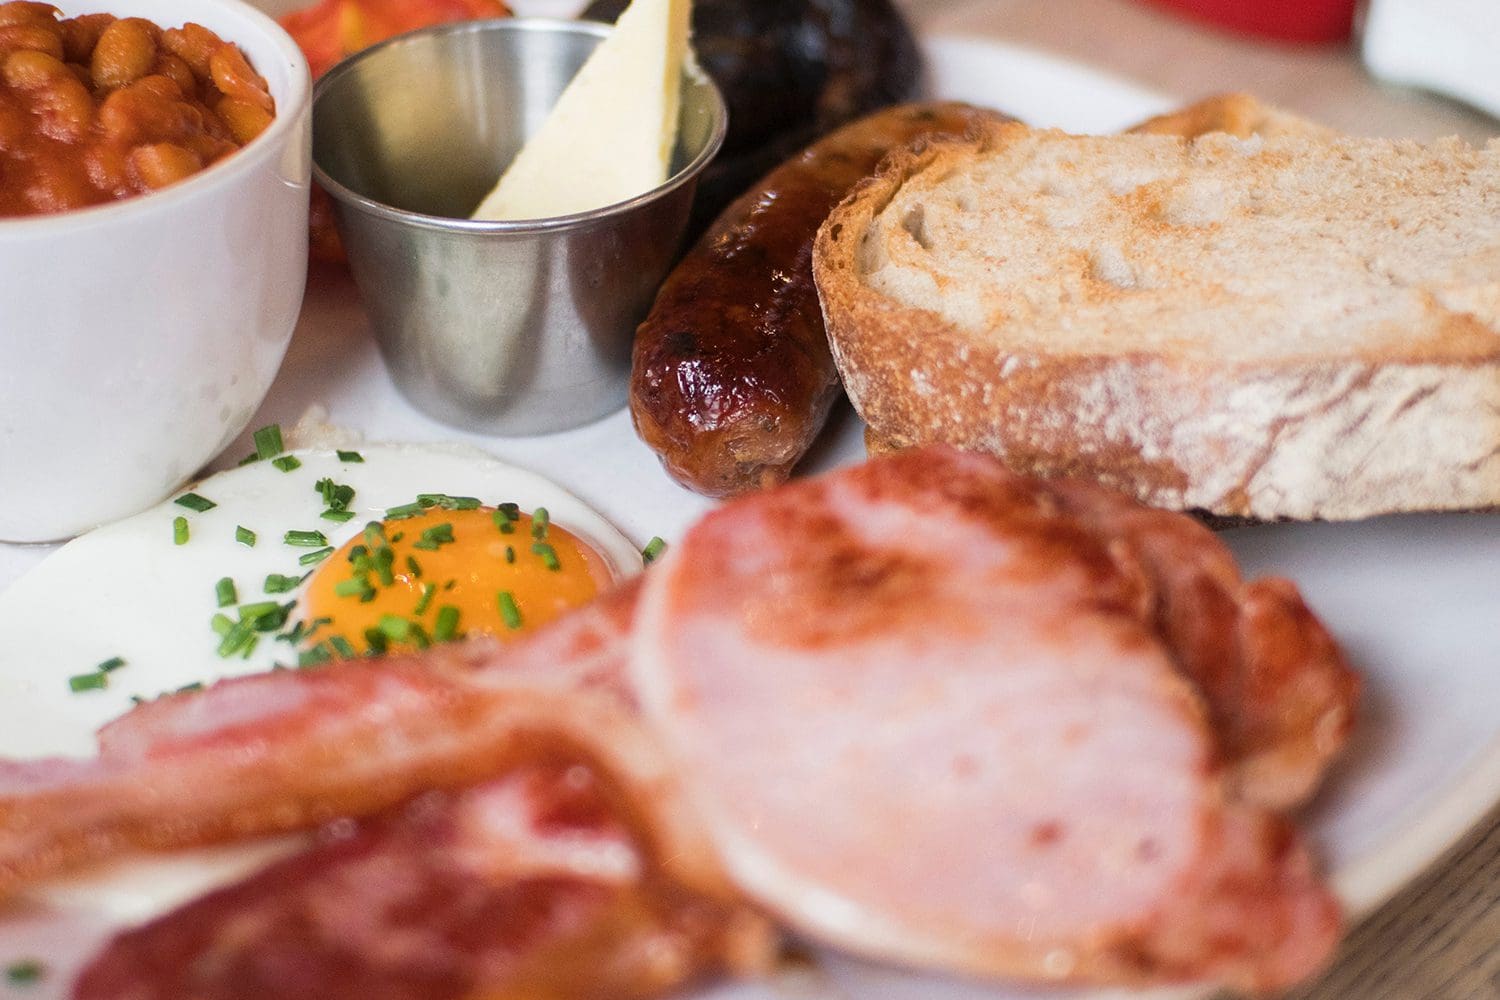 Image of a full english breakfast